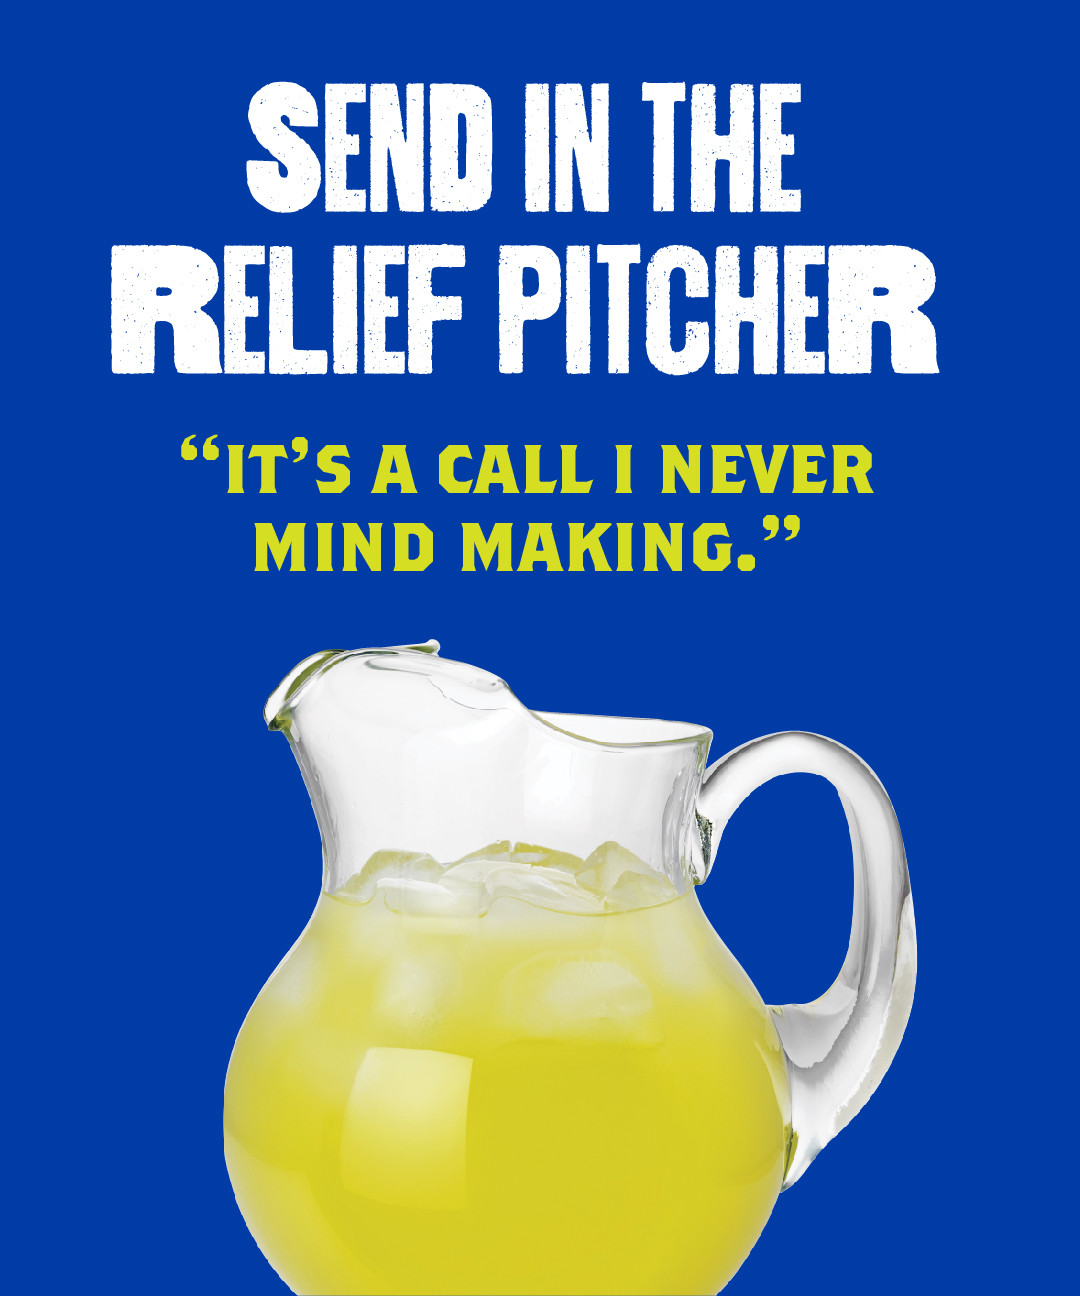 Need a relief pitcher?